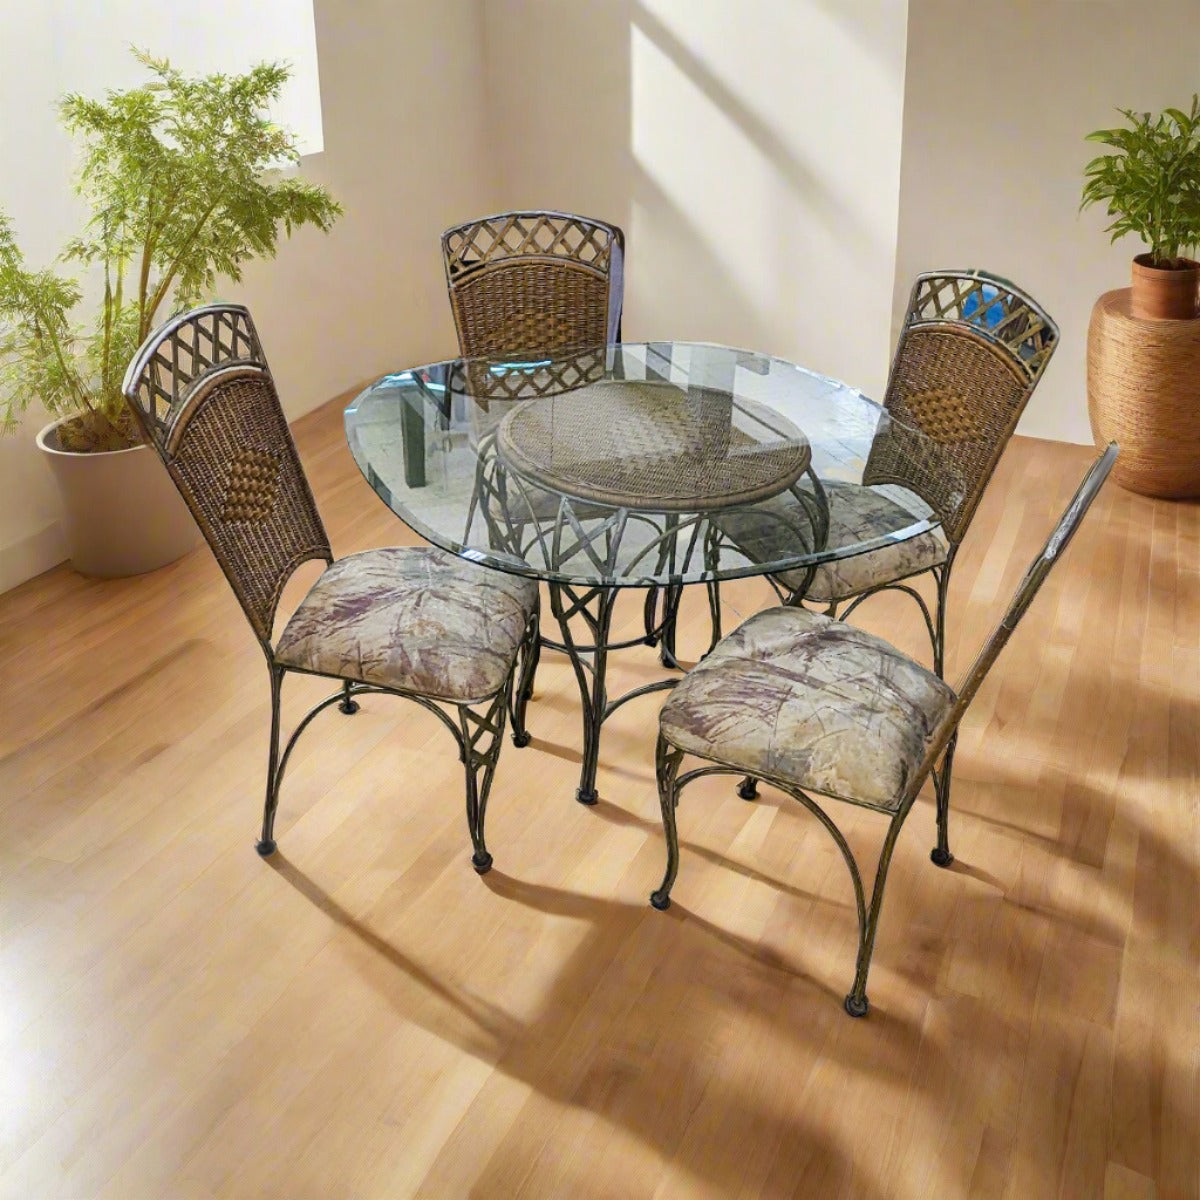 Brushed Bronze Sq Glass Top Rattan Dining Table + 4 Chairs - Habroc - Online ReStore